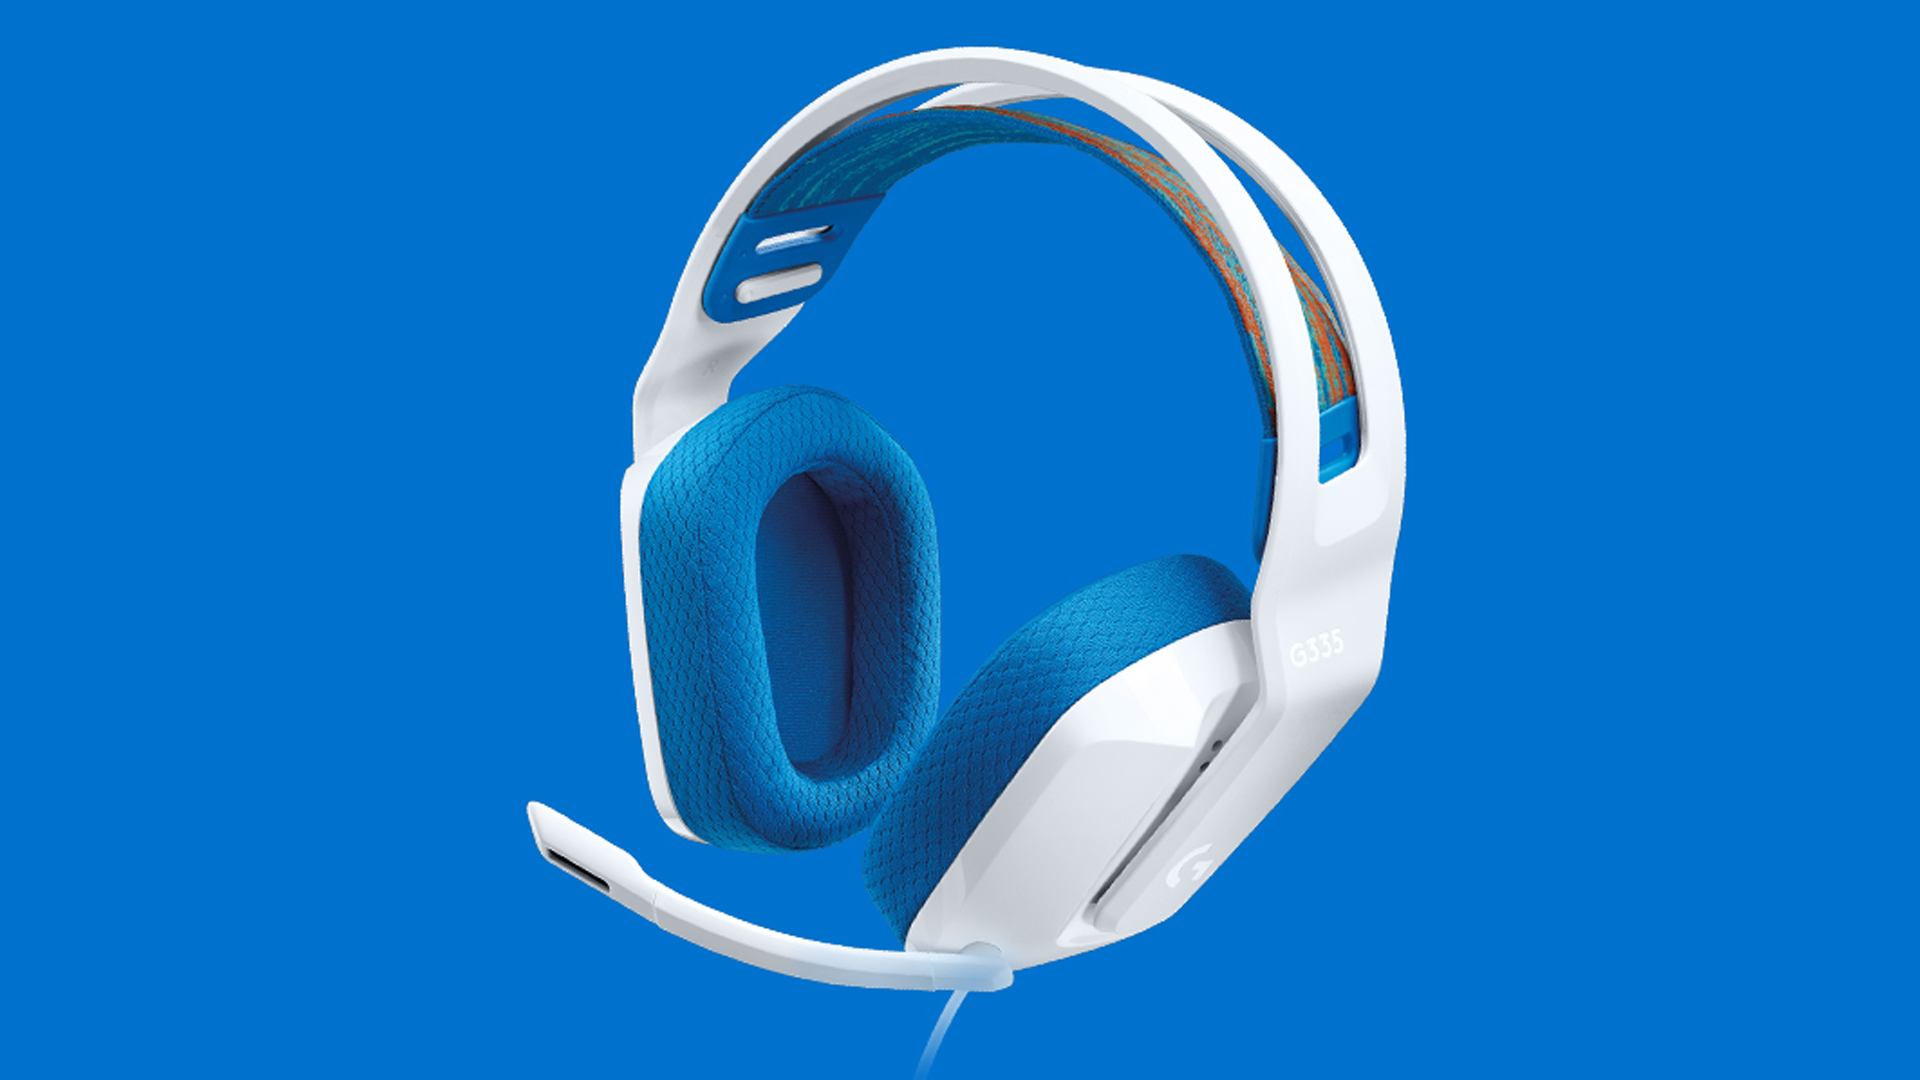 Image for You can get a Logitech headset for just £25 at Amazon right now